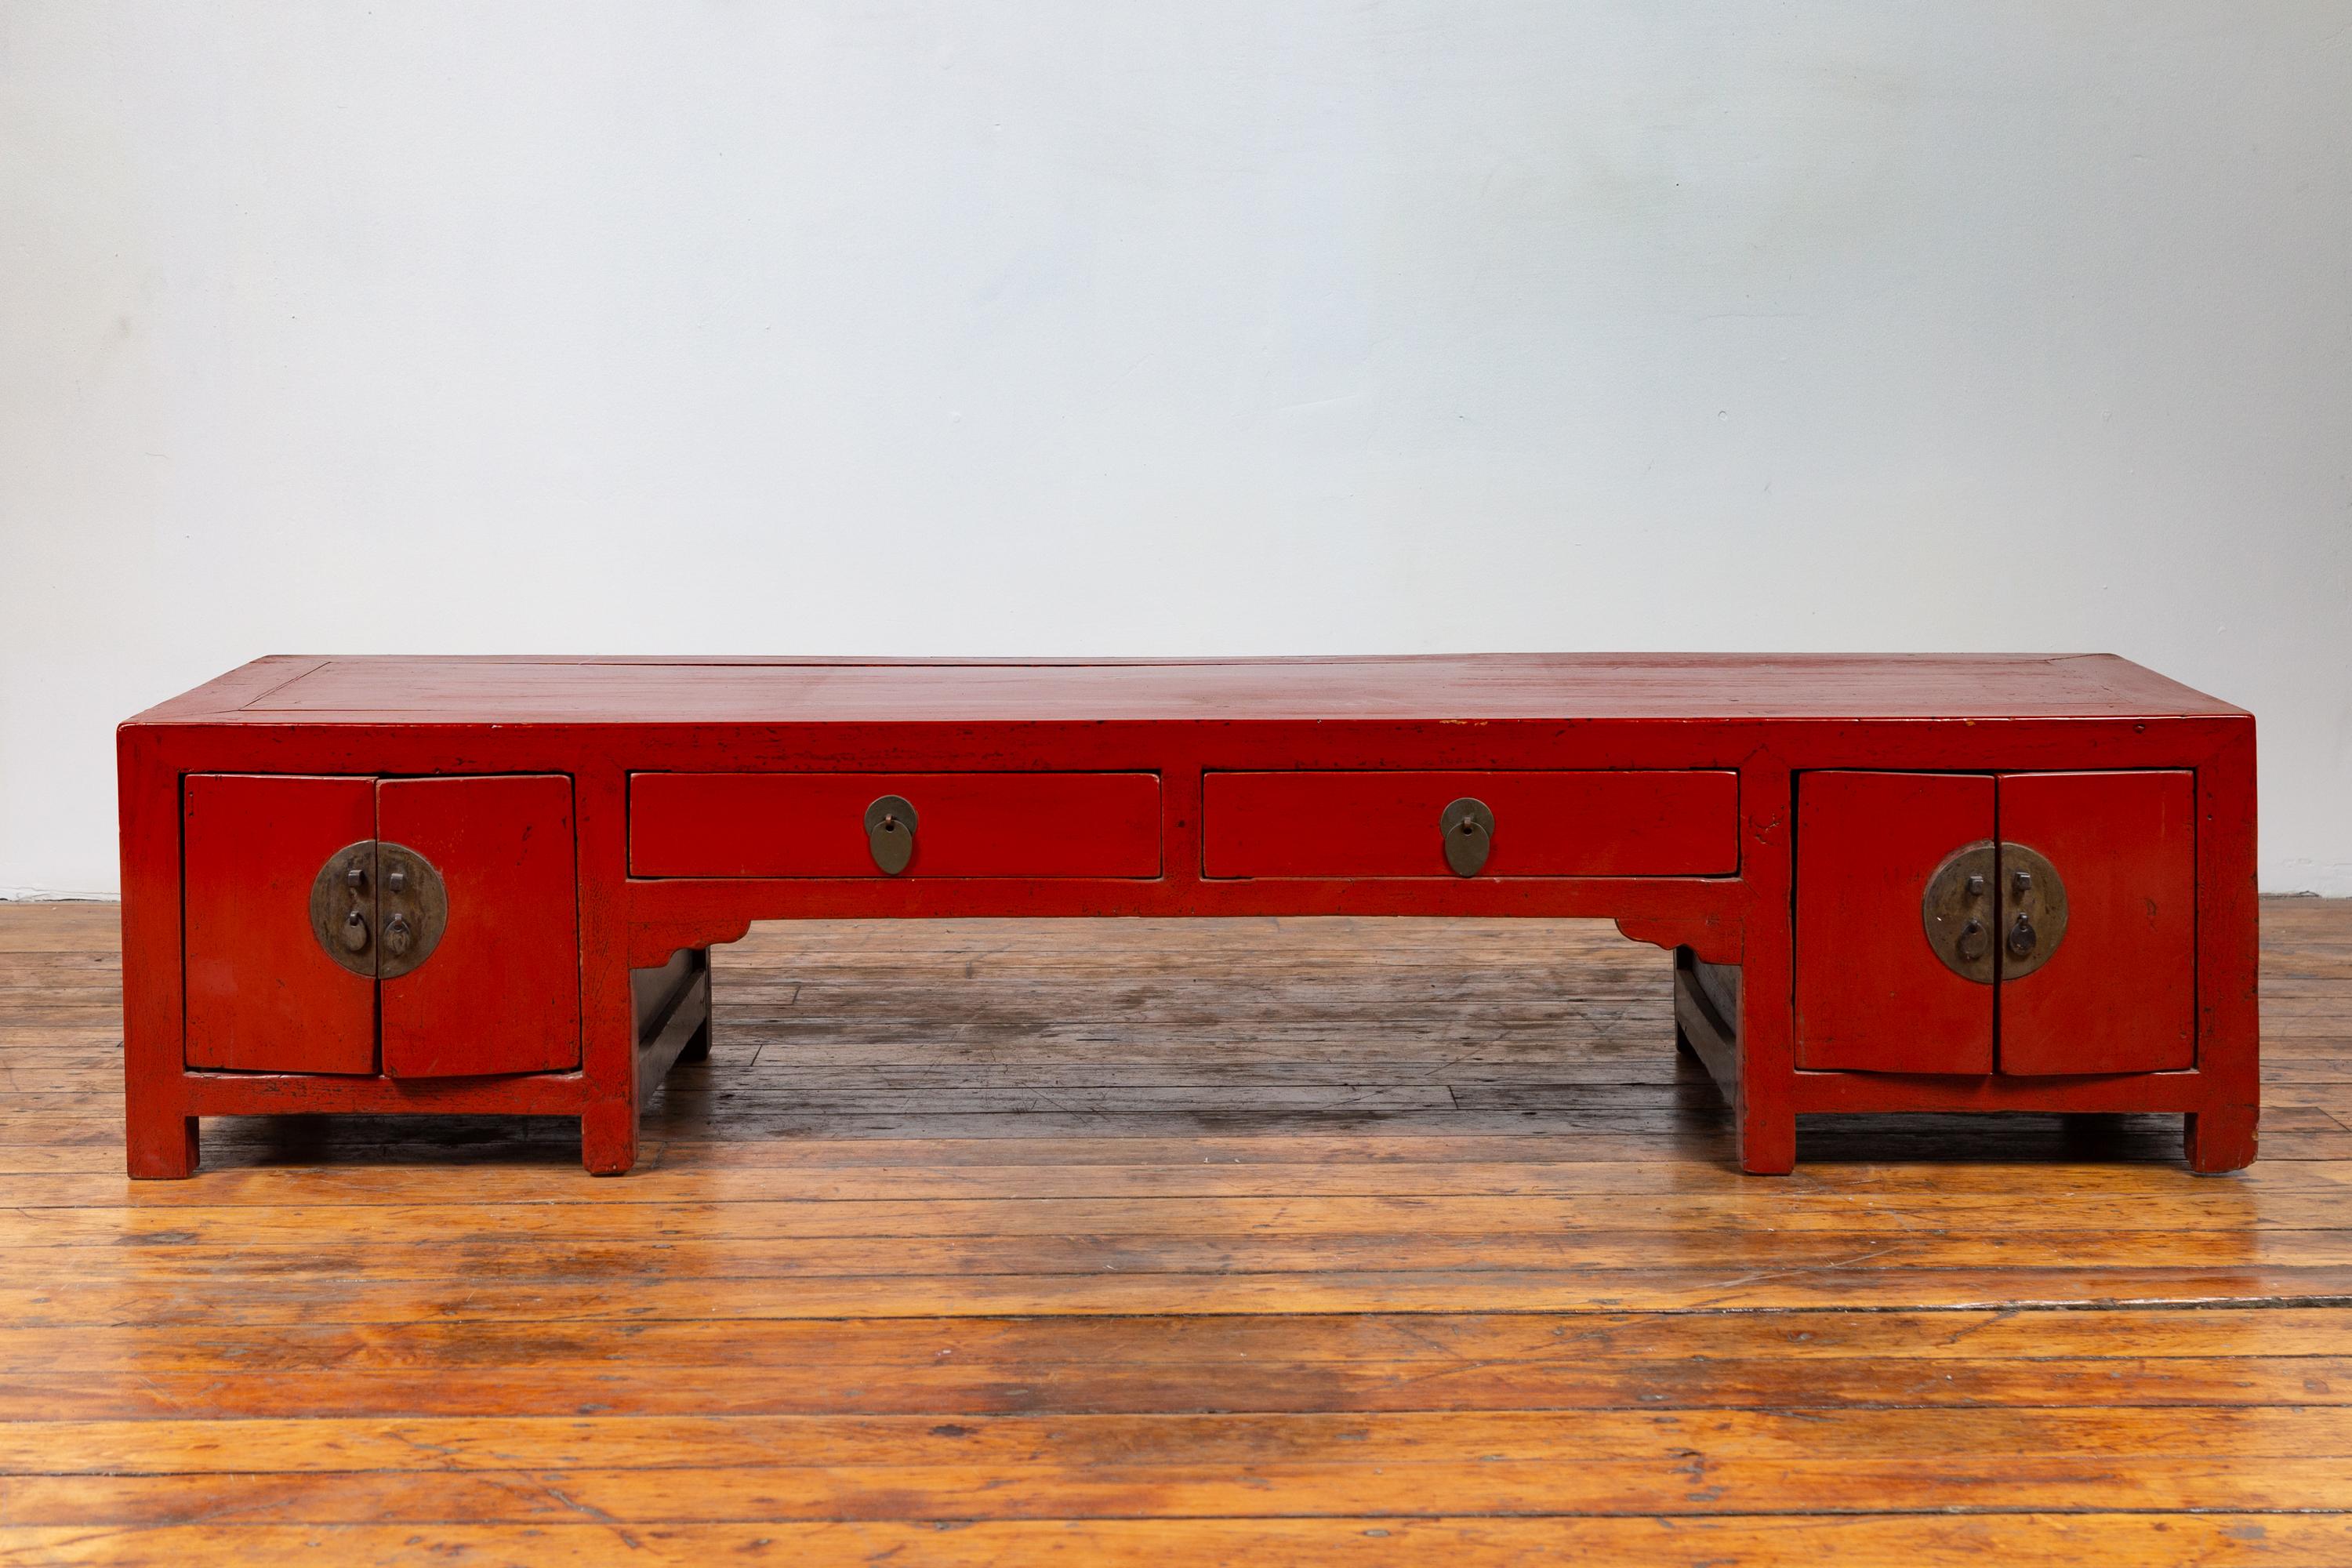 Antique Chinese Ming Dynasty style red lacquered low kang cabinet from the early 20th century, with drawers and doors. Born in China during the early years of the 20th century, this charming low kang cabinet features a red lacquered body